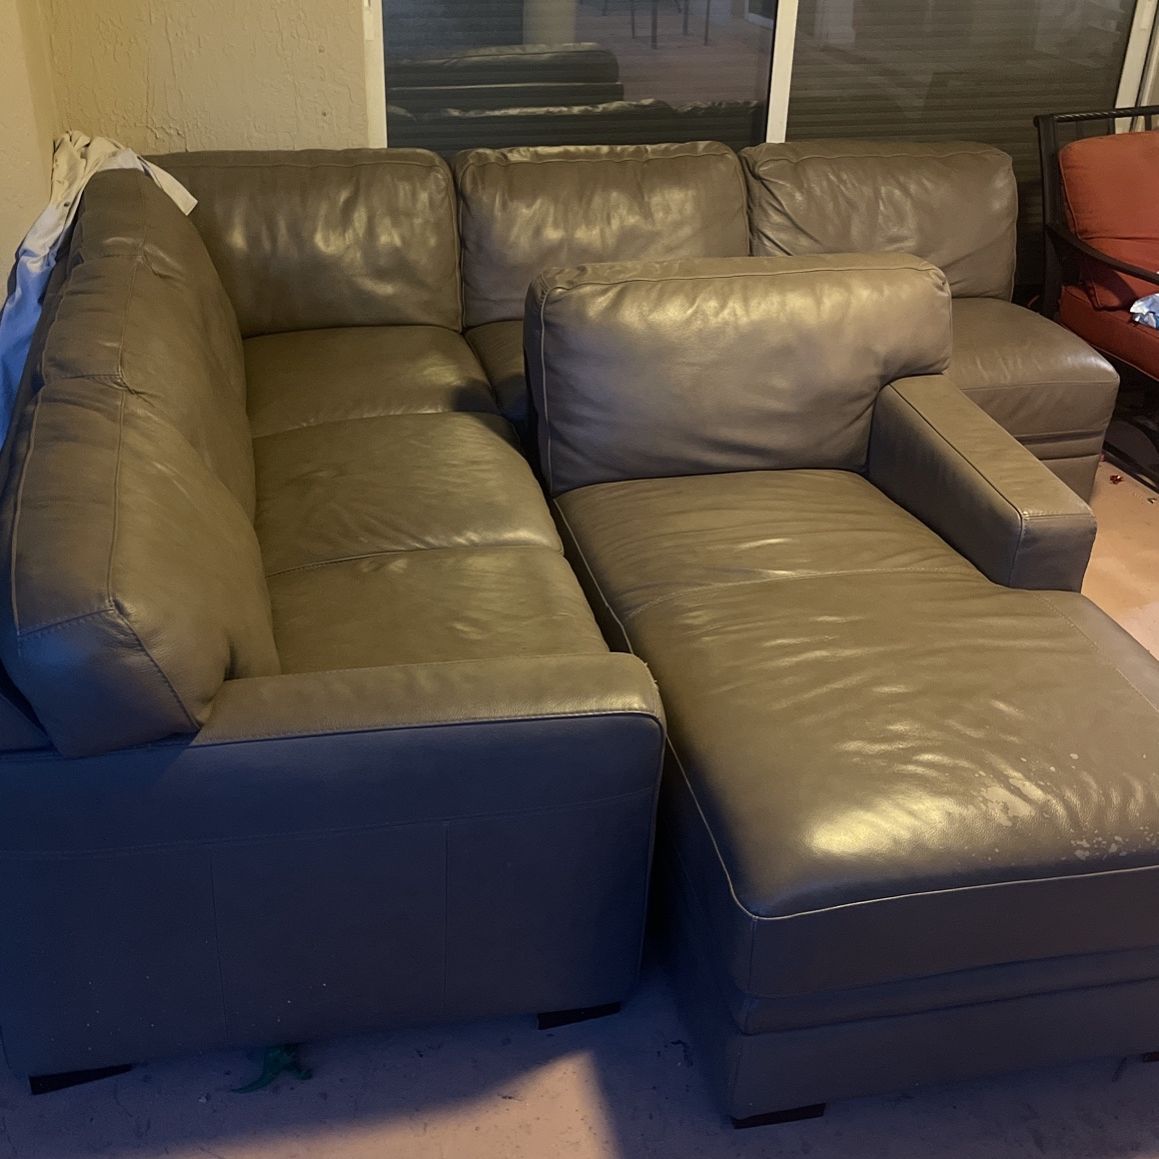 Free Couch Nice Sectional, If Picked Up Tonight, As Is